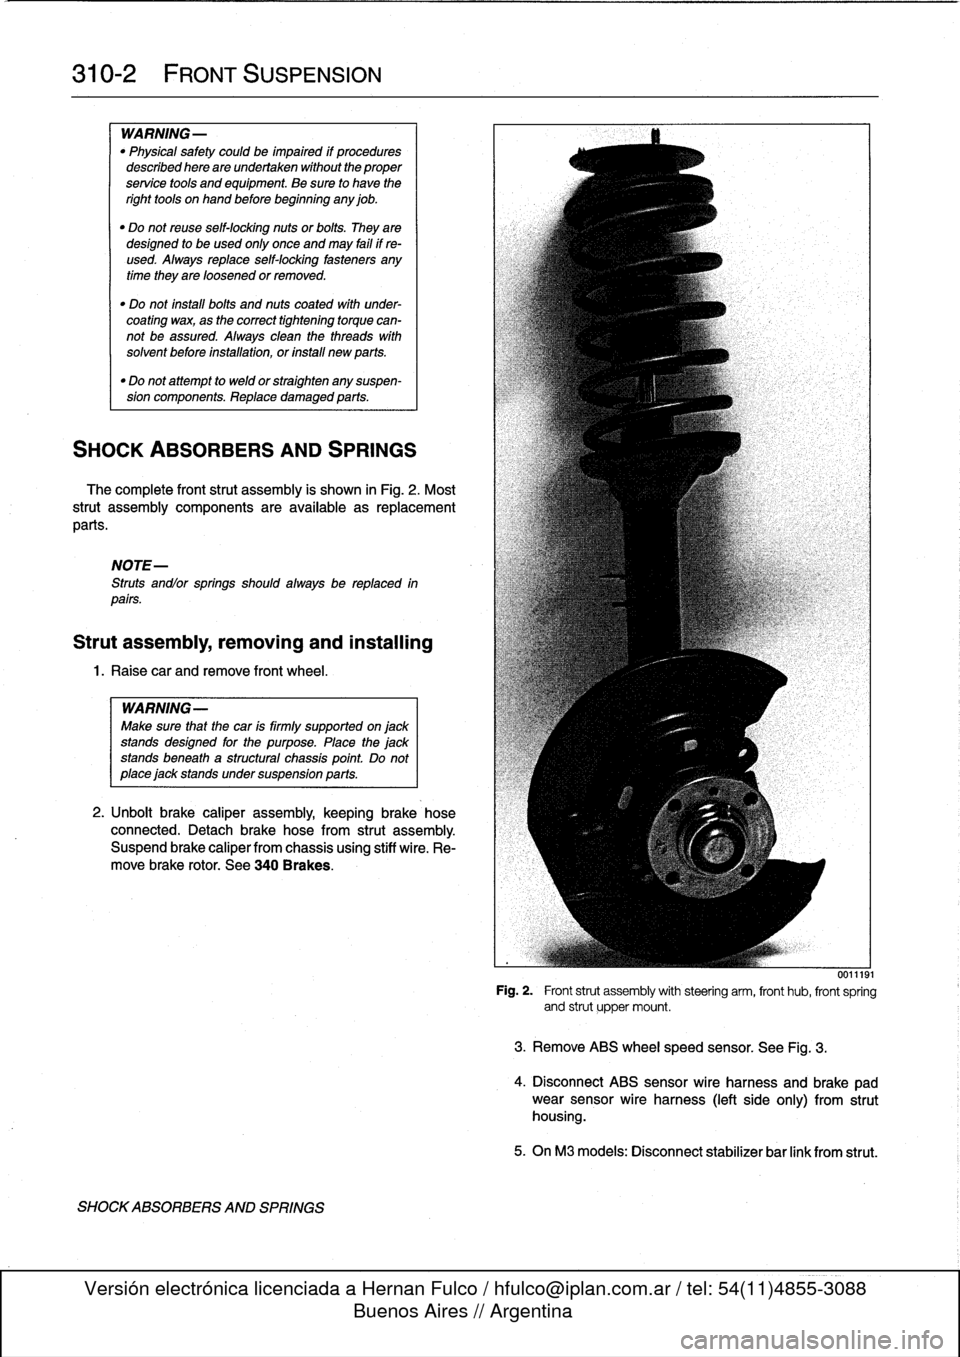 BMW M3 1993 E36 Workshop Manual 
310-2

	

FRONT
SUSPENSION

WARNING-

"
Physical
safety
could
be
impaired
if
procedures
described
here
areundertaken
without
the
proper
service
tools
and
equipment
.
Be
sure
to
have
the
right
tools
o